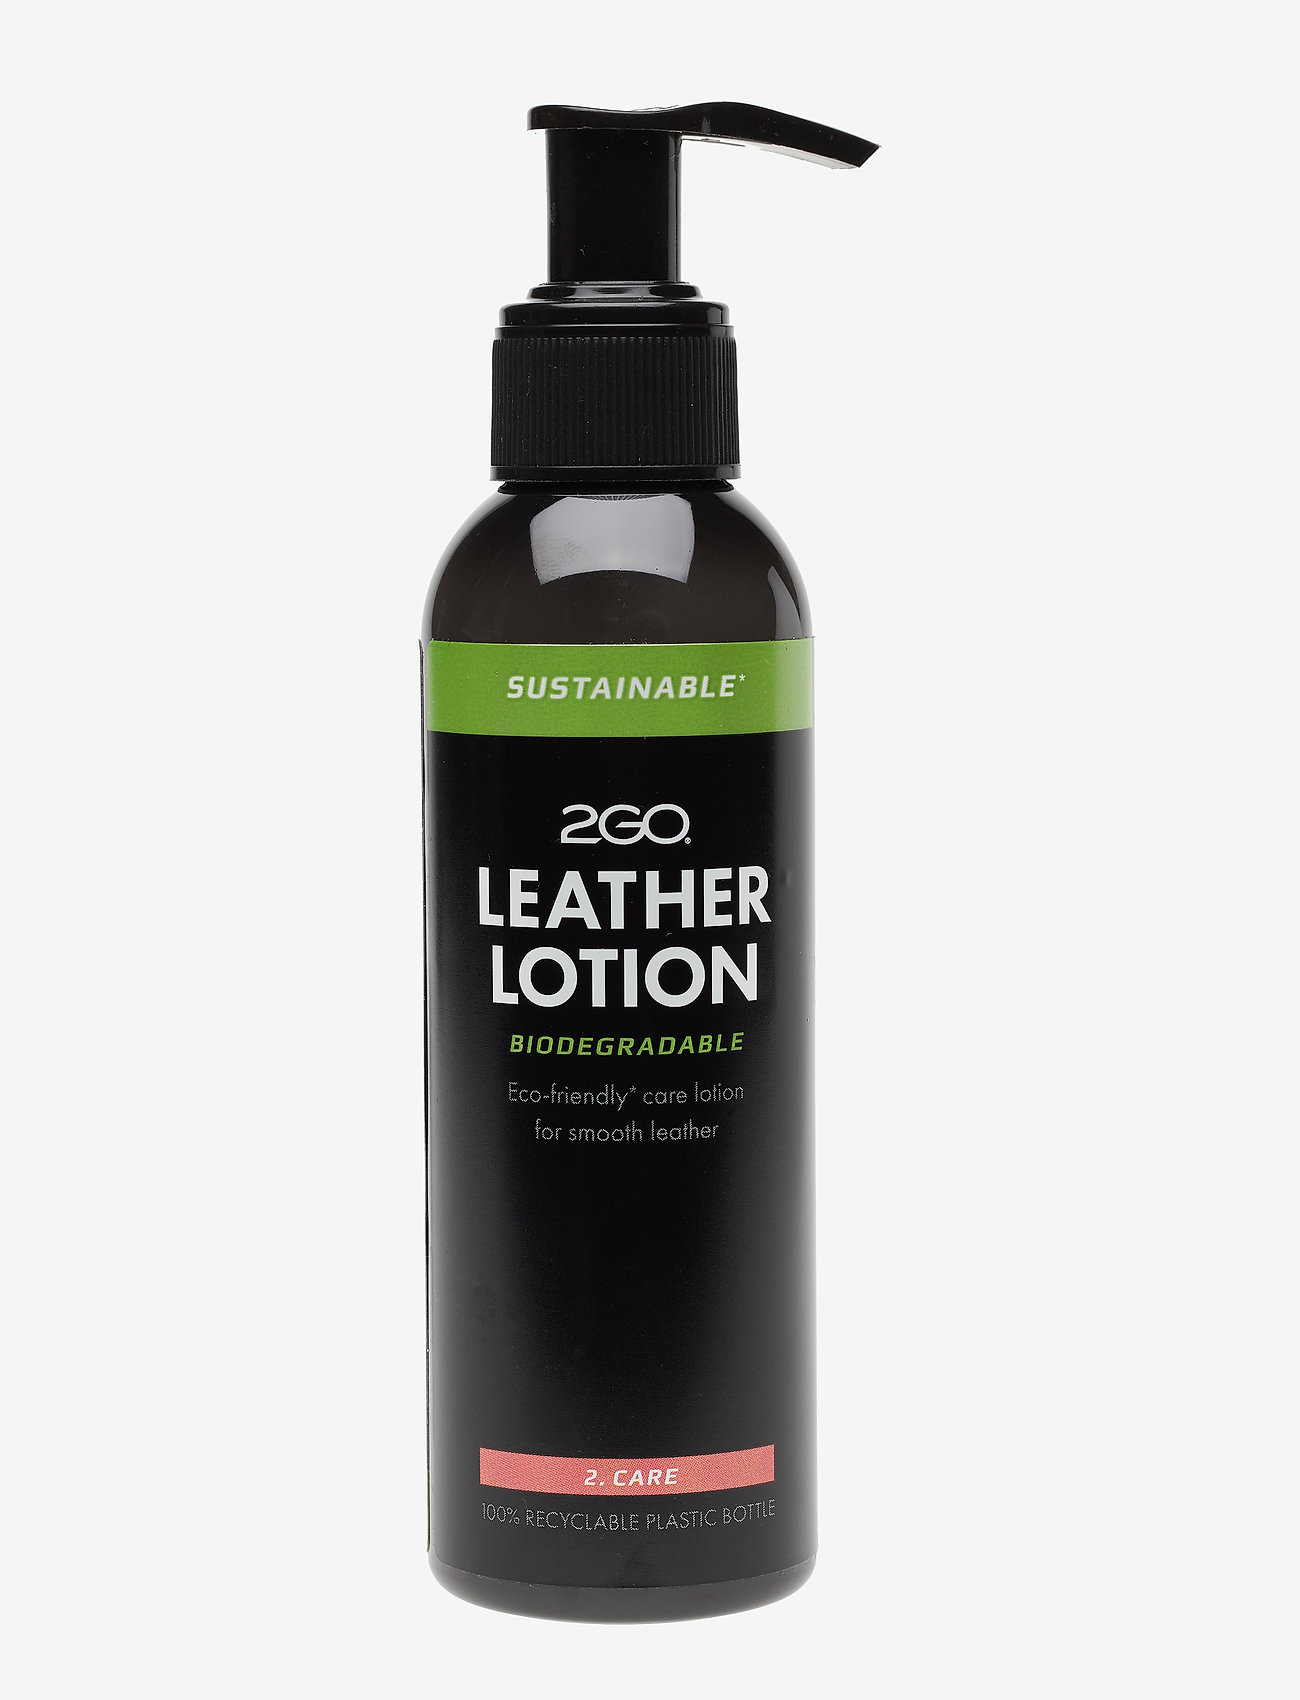 2GO - 2GO Sustainable Leather Lotion - madalaimad hinnad - no color - 0